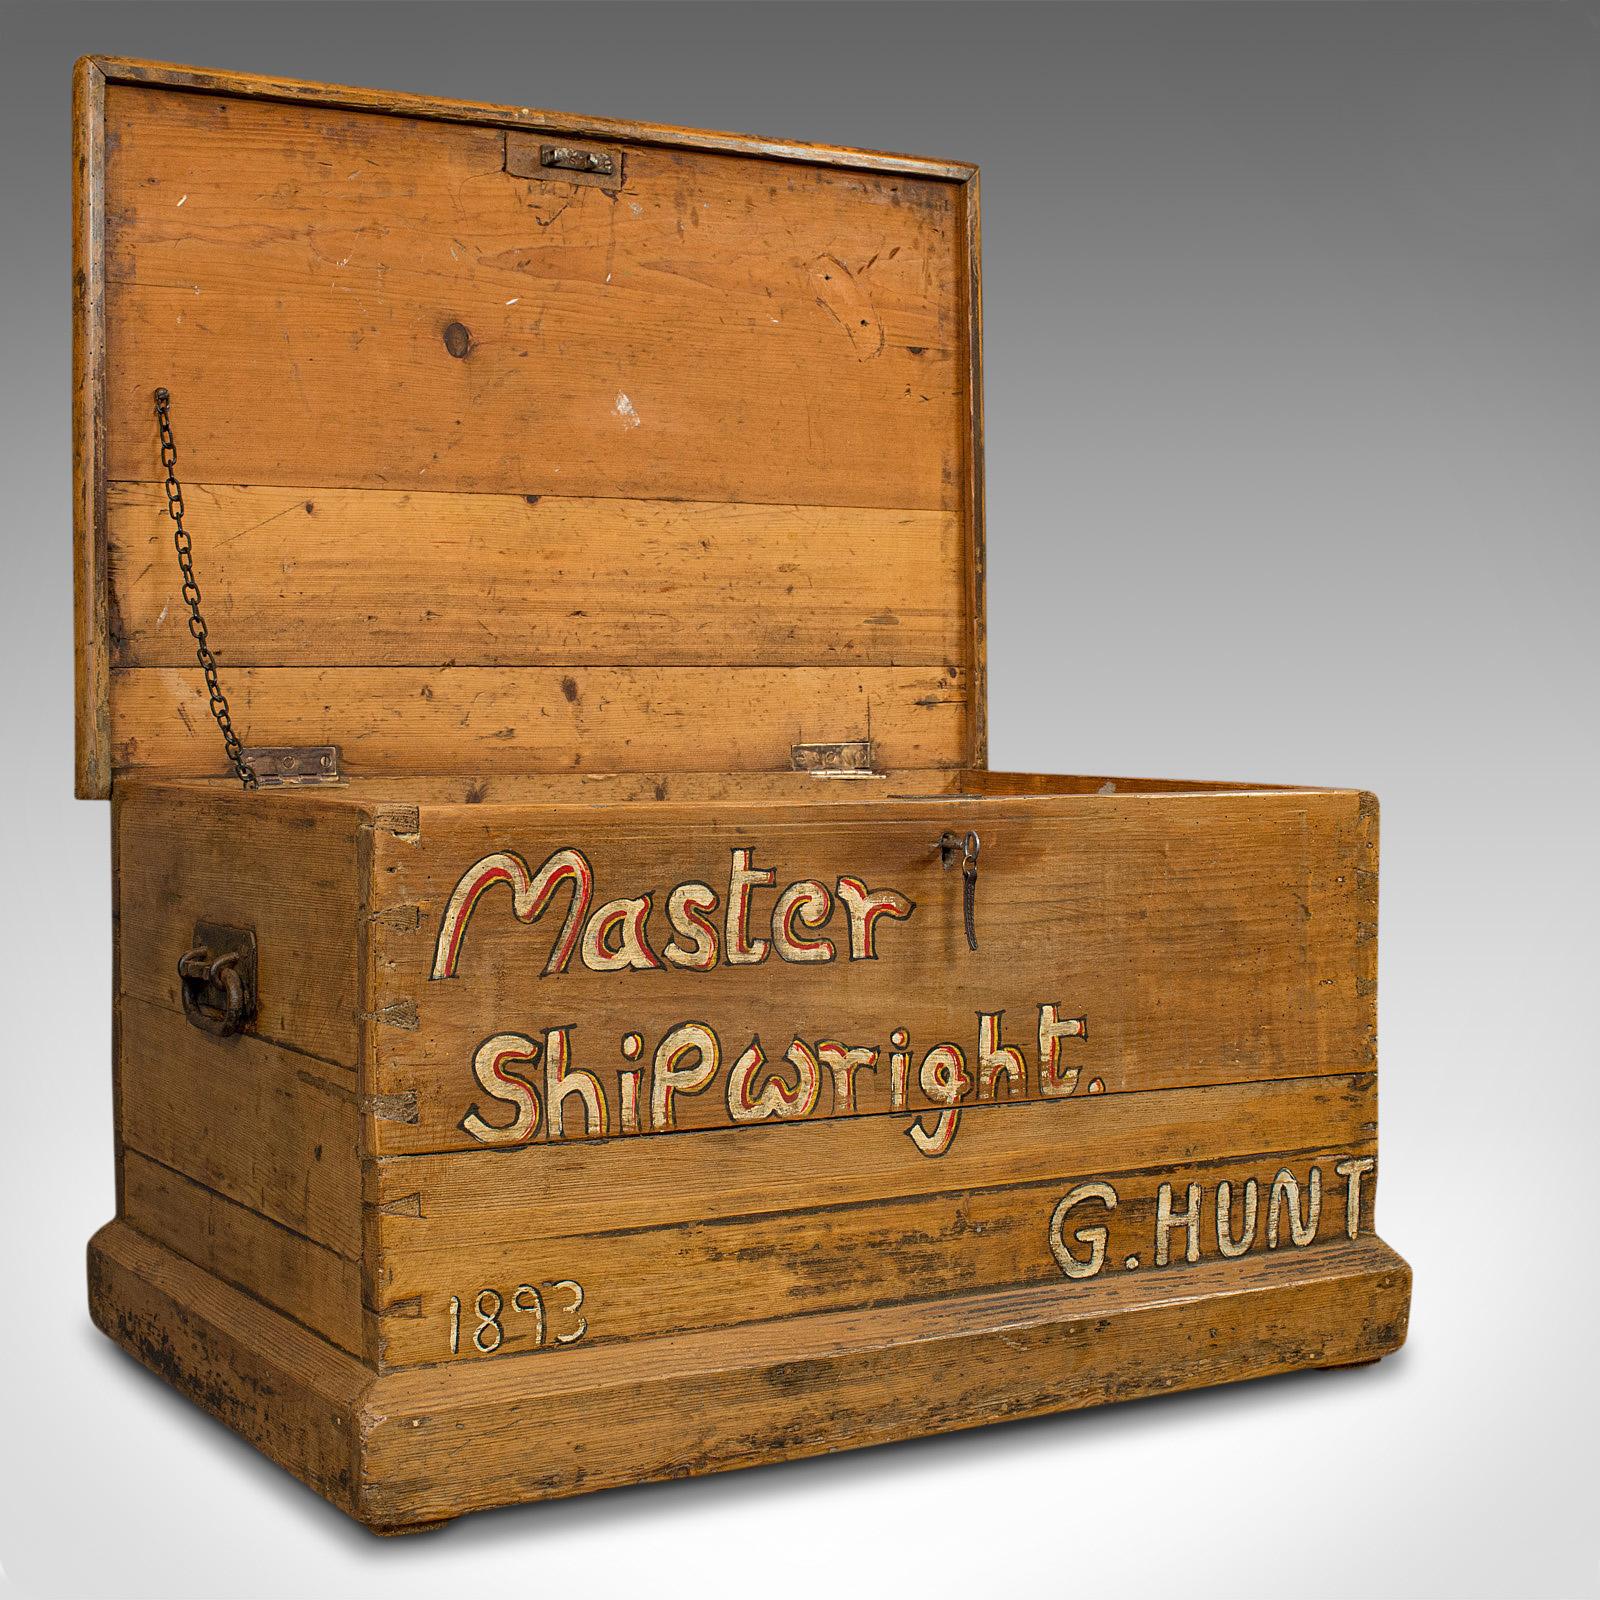 This is an antique shipwright's tool chest. An English, pine merchants trunk, dating to the late 19th century, circa 1870.

Lasting Victorian maritime appeal
Displays a desirable aged patina - natural weathering adding further appeal
Pine stocks